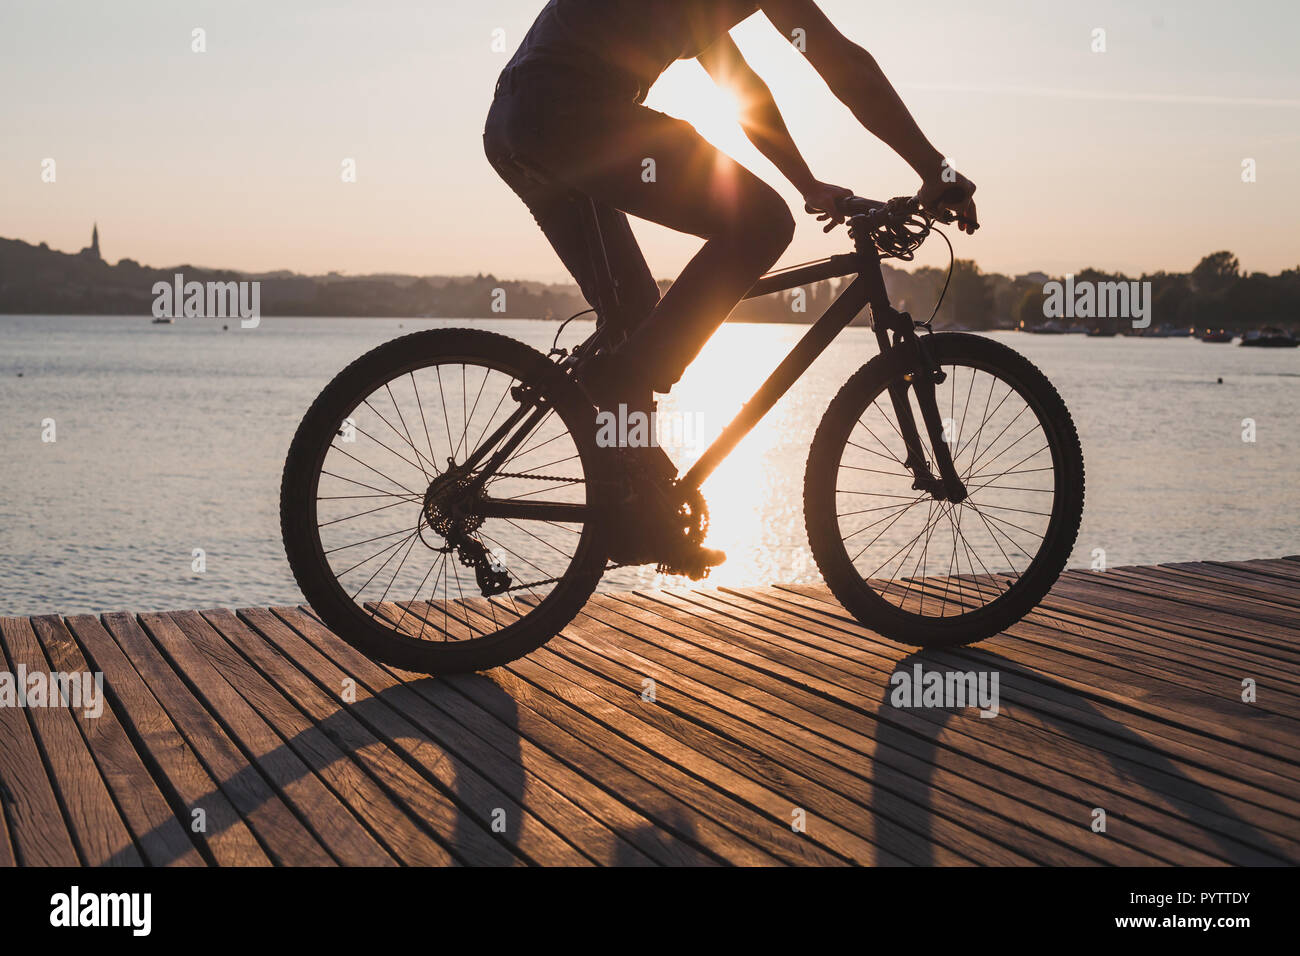 man riding bicycle at sunset, cycling in summer, silhouette of cyclist near the lake Stock Photo